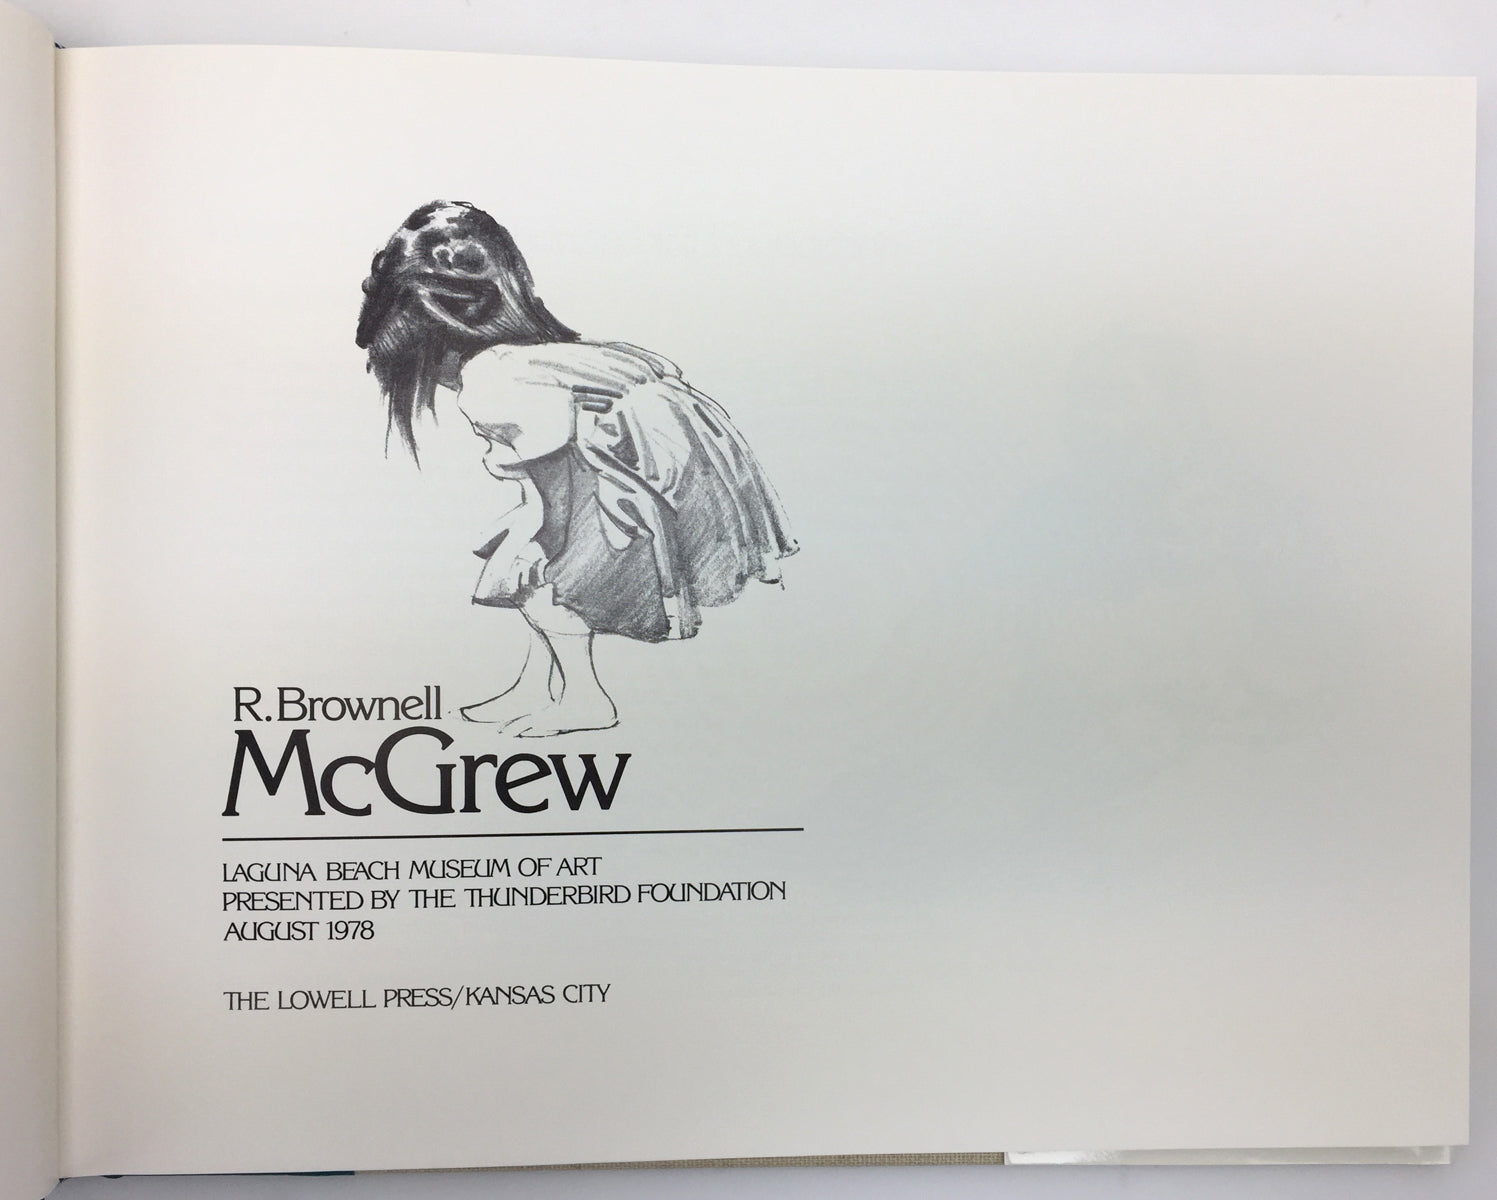 Ralph Brownell McGrew by Laguna Beach Museum of Art, Presented by the Thunderbird Foundation, August 1978 (B90536-1220-095)3